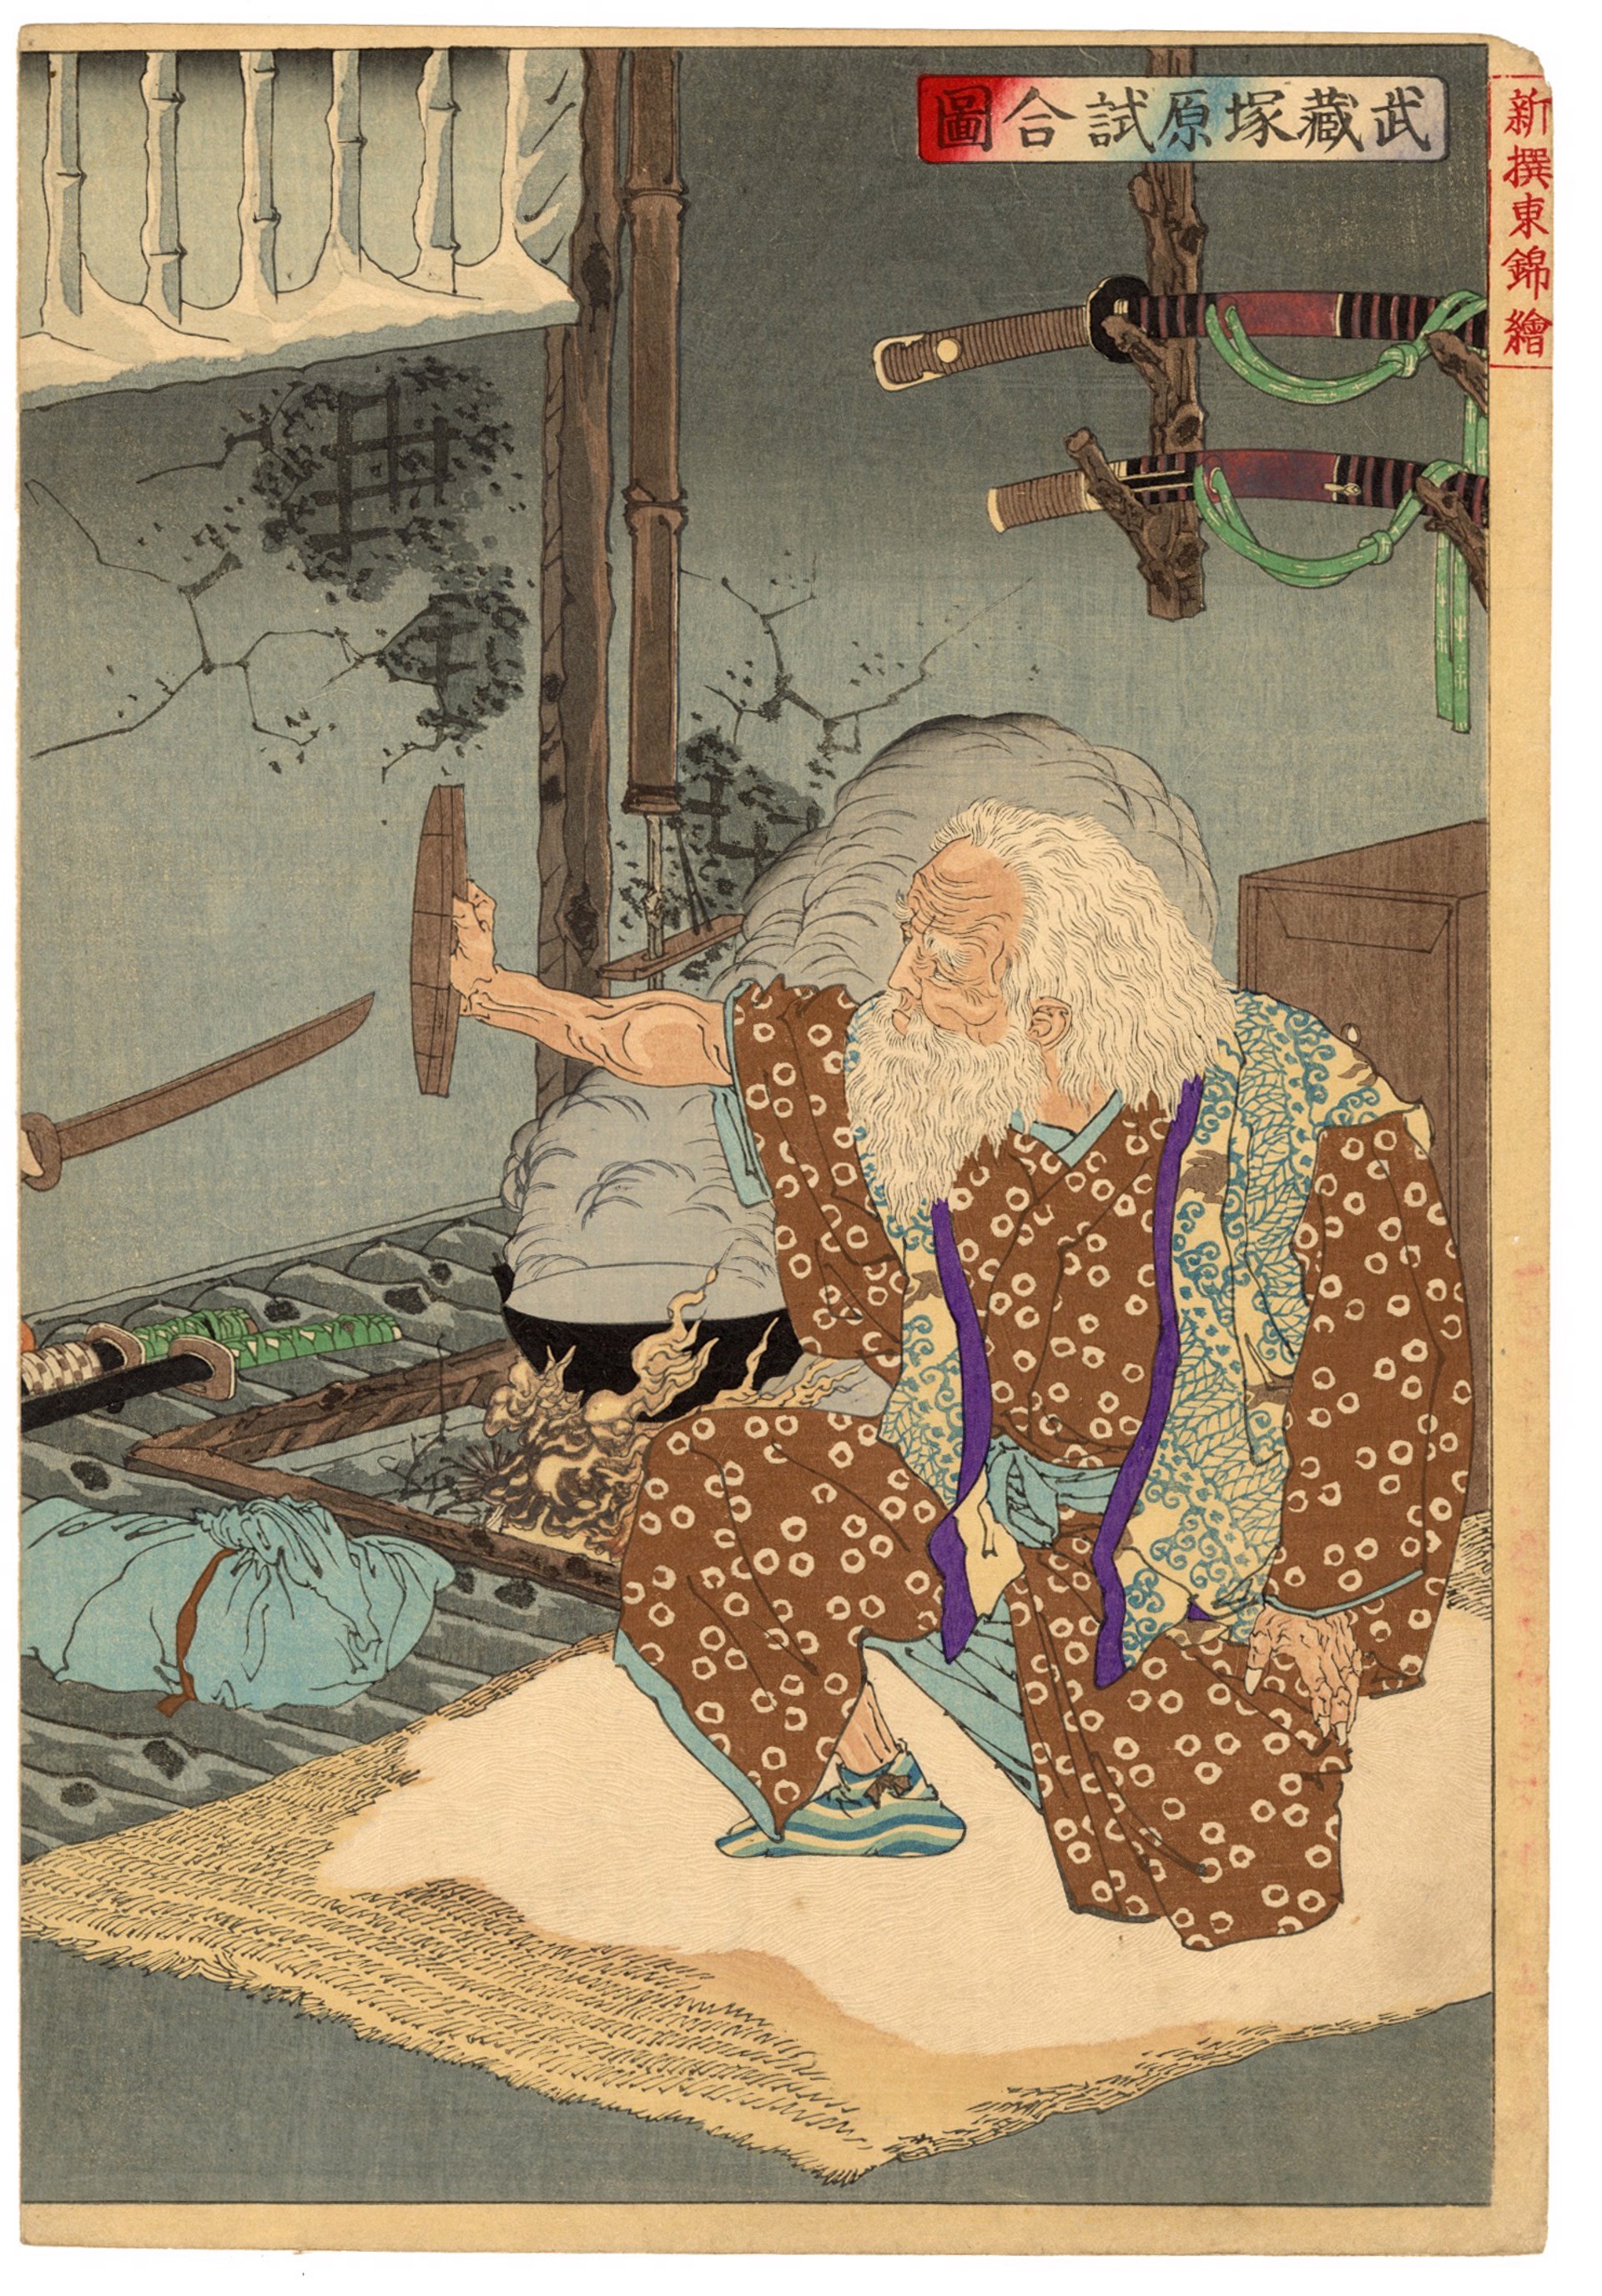 Duel Between Miyamoto Musashi, Holding Two Wooden Swords and the Old Master Tsukihara Bokuden, Who Uses awooden Pot Lid in Defense by Yoshitoshi